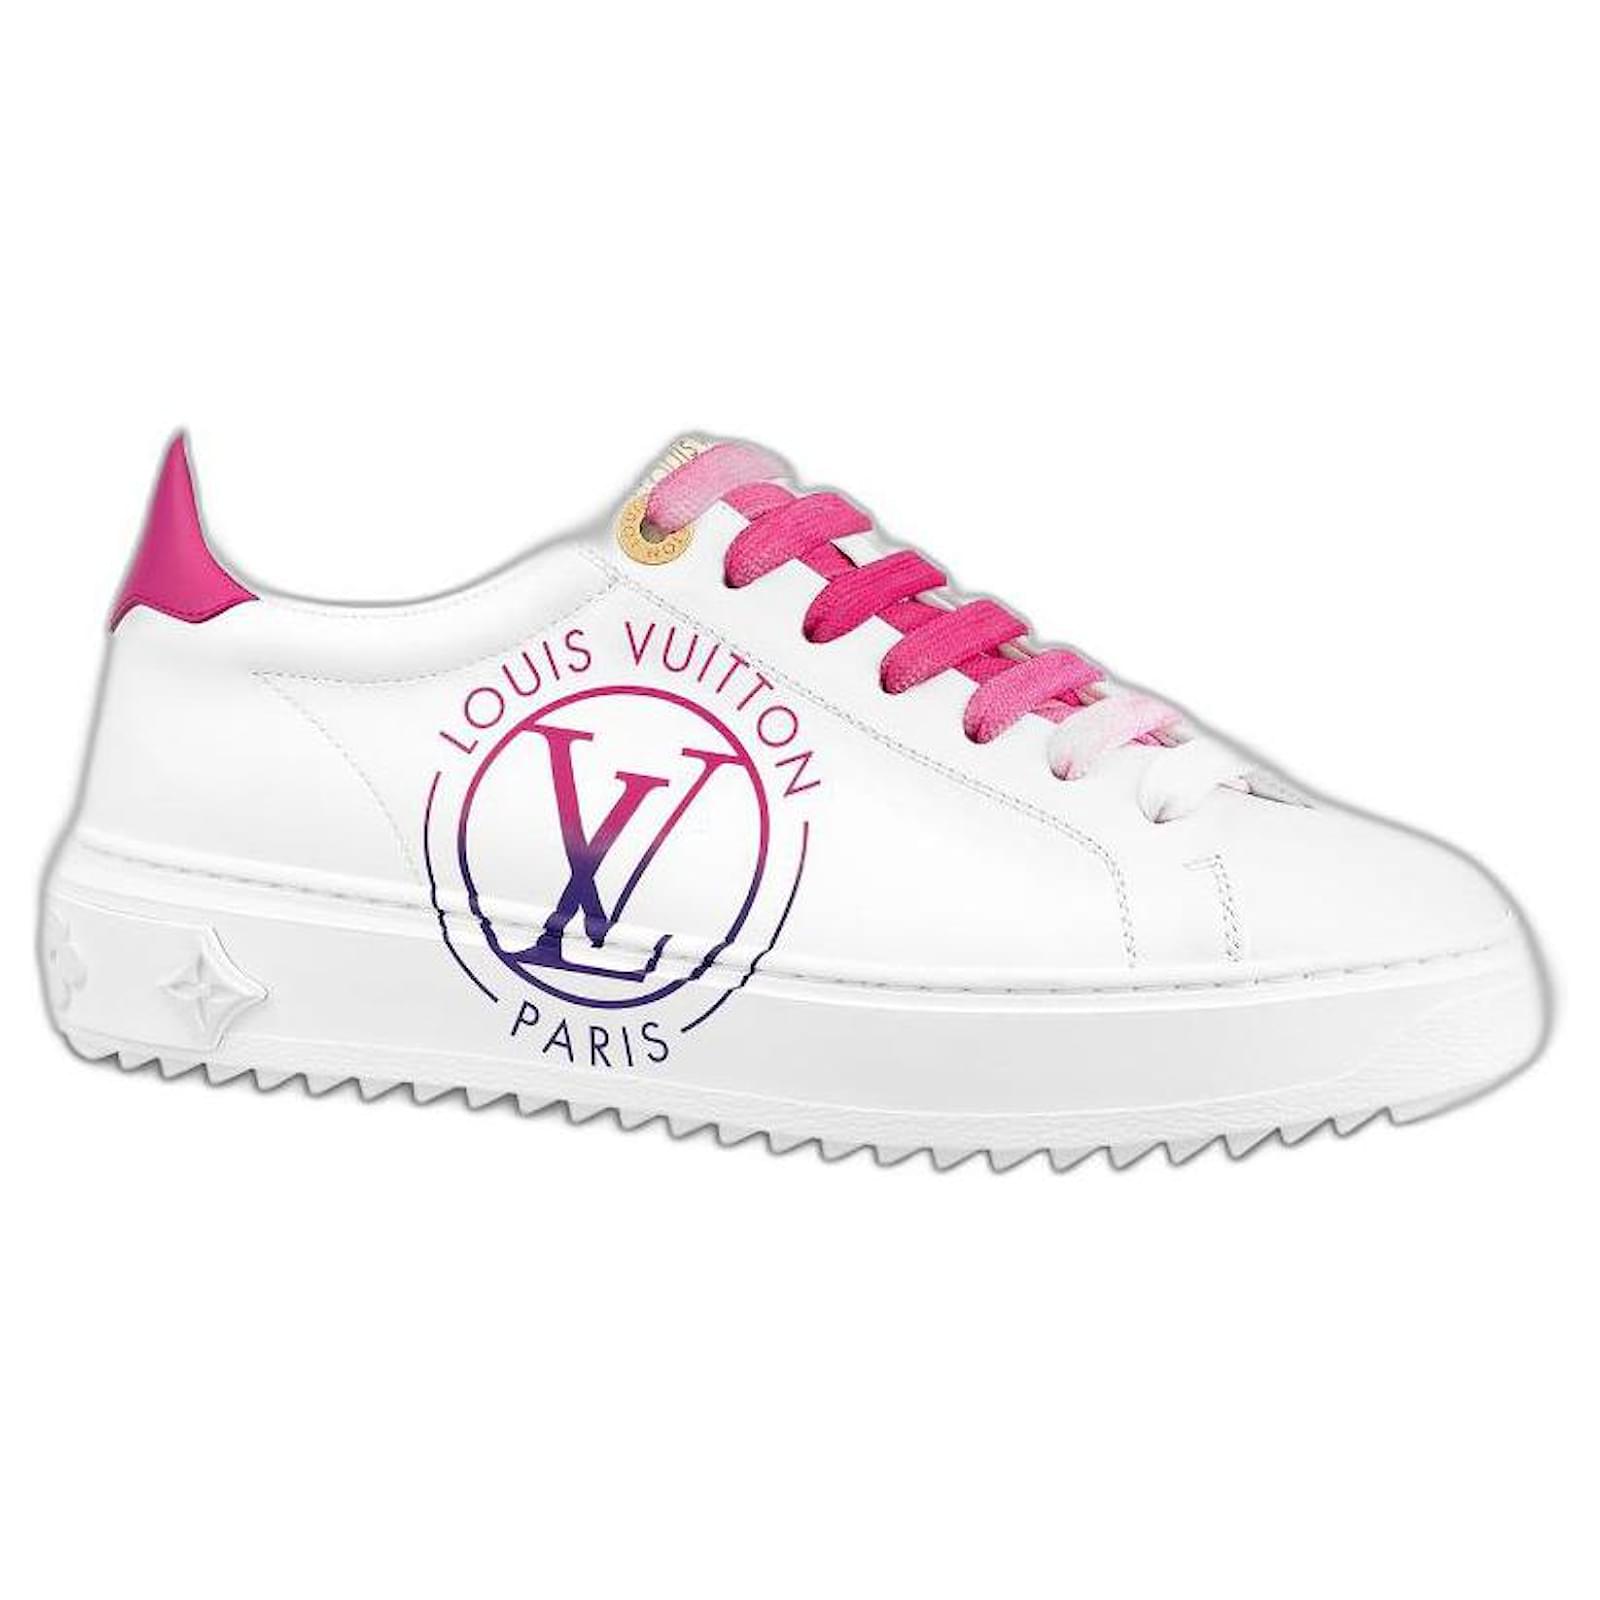 Louis Vuitton x Lady Pink x Lee Quiñones LV Trainer collab: Where to buy,  release date, and more explored